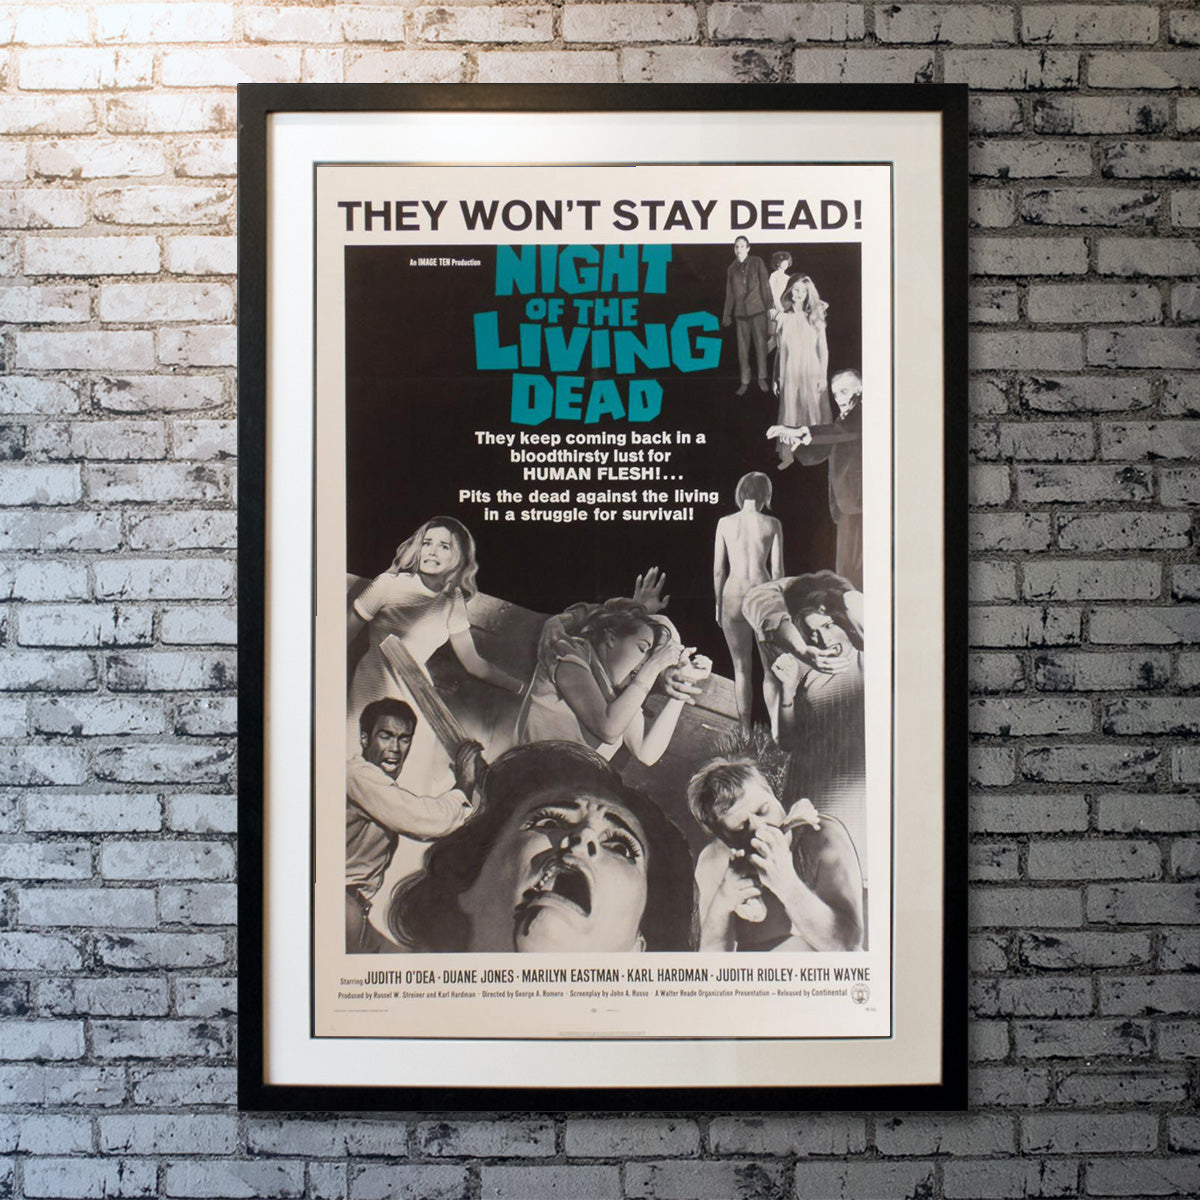 Original Movie Poster of Night Of The Living Dead (1968)